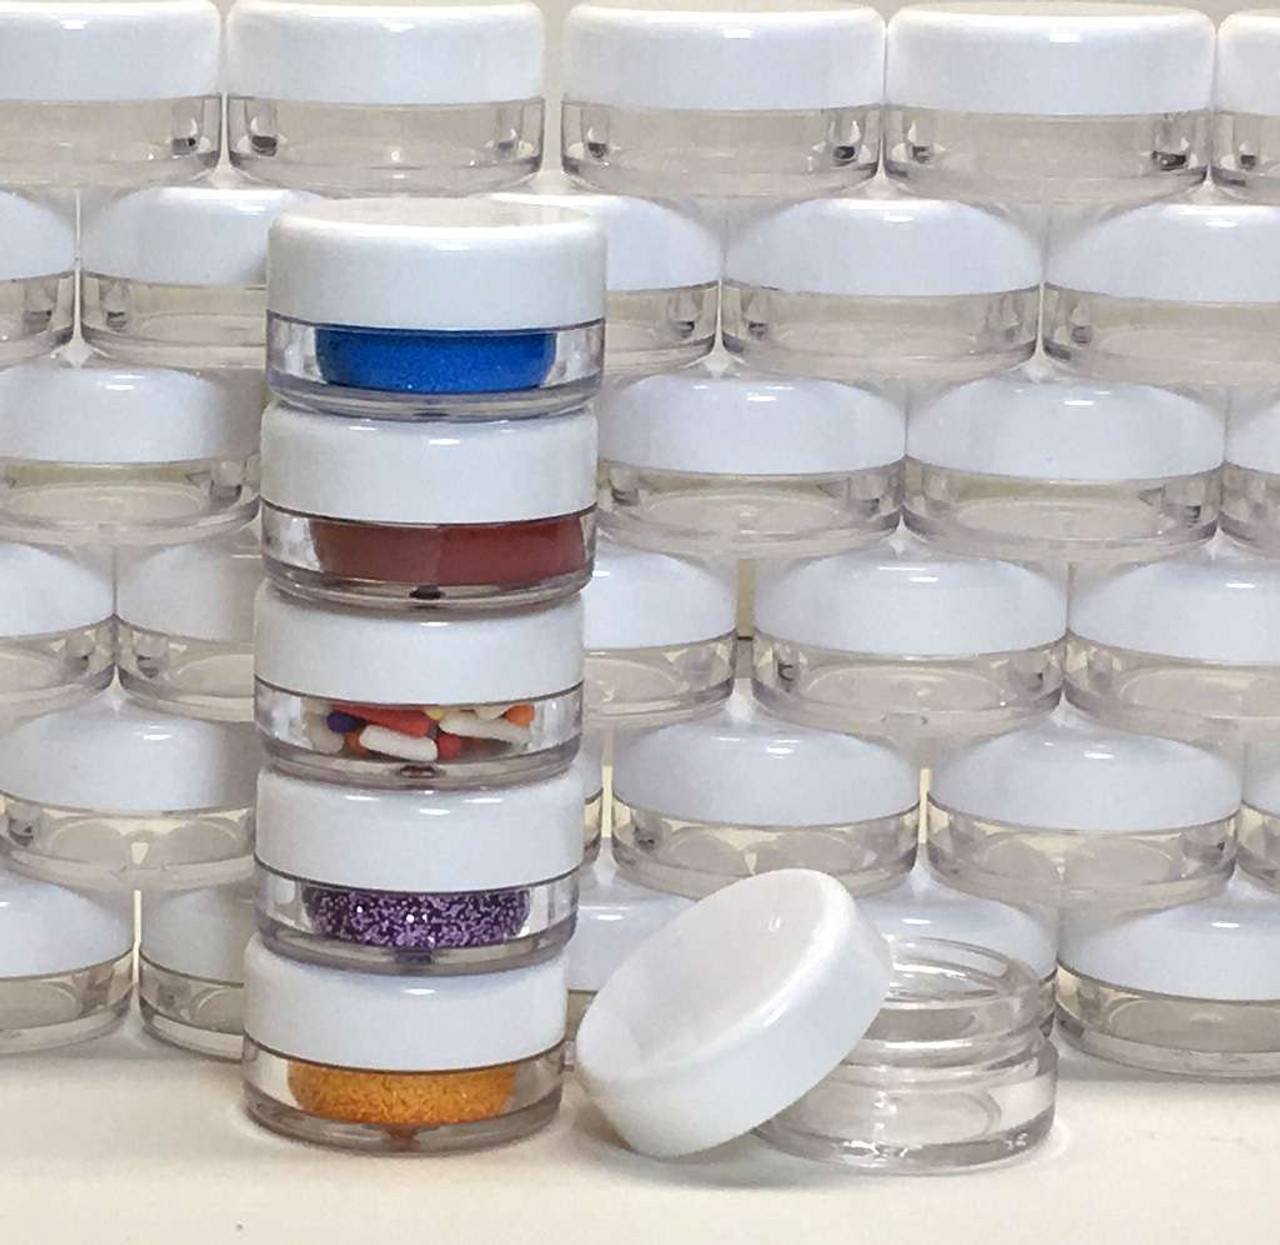 50 Pieces 3 Gram Sample Containers with Lids, Black Sample Jars